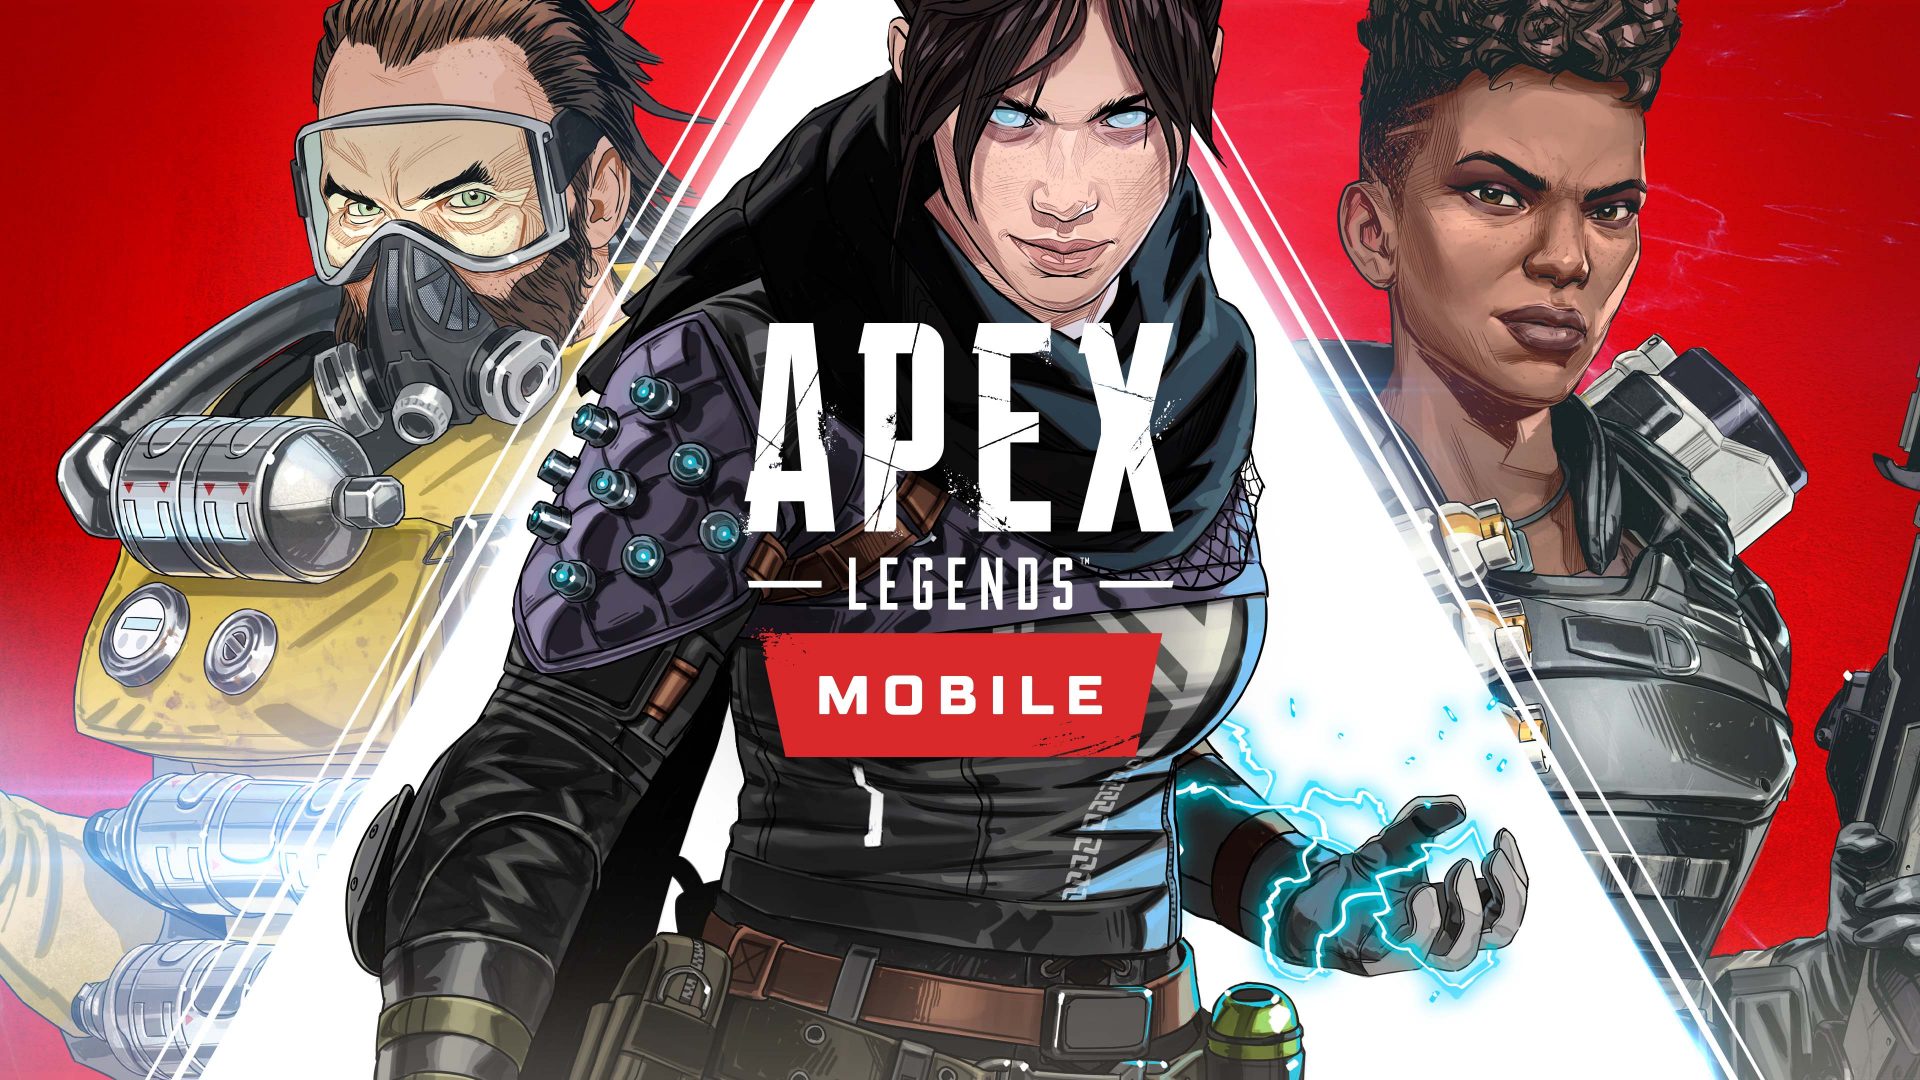 Apex Legends Mobile soft launch coming in March 2022 in select regions